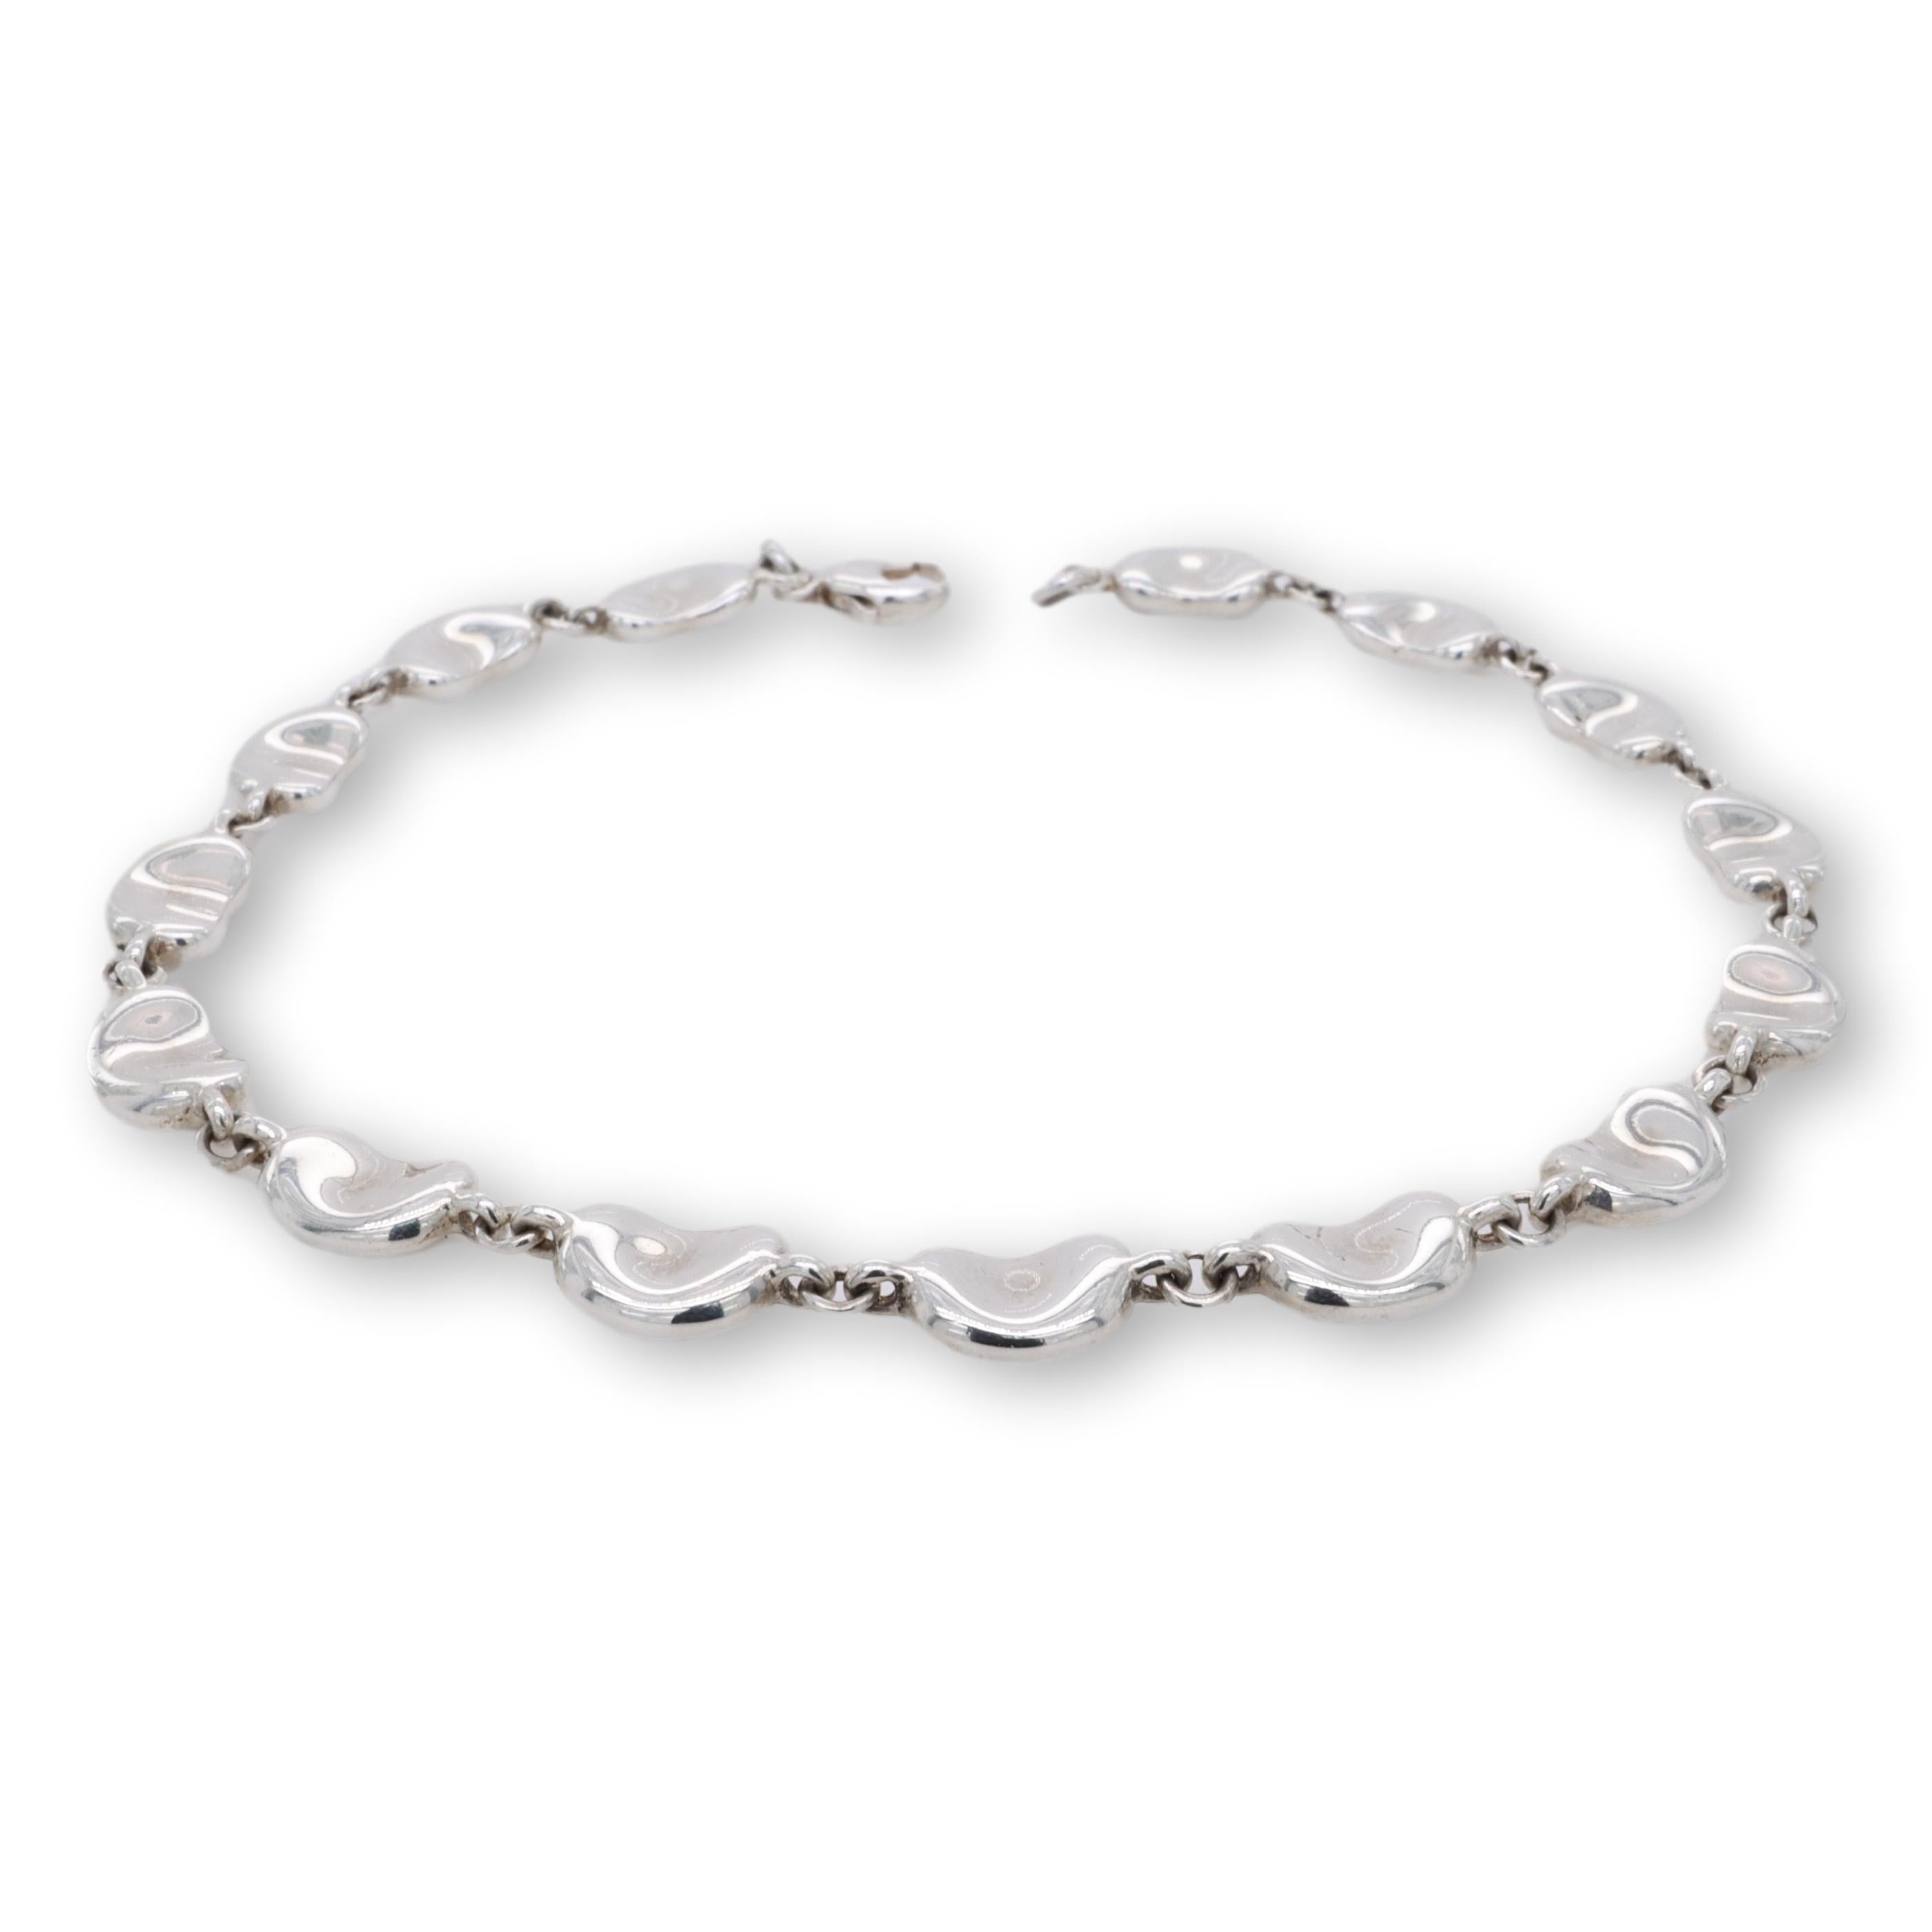 Tiffany & Co. bracelet designed by Elsa Peretti from the bean collection finely crafted in sterling silver featuring 15 bean motifs with lobster claw closure. Fully hallmarked with logo and metal content.

Bracelet Specifications
Brand: Tiffany &